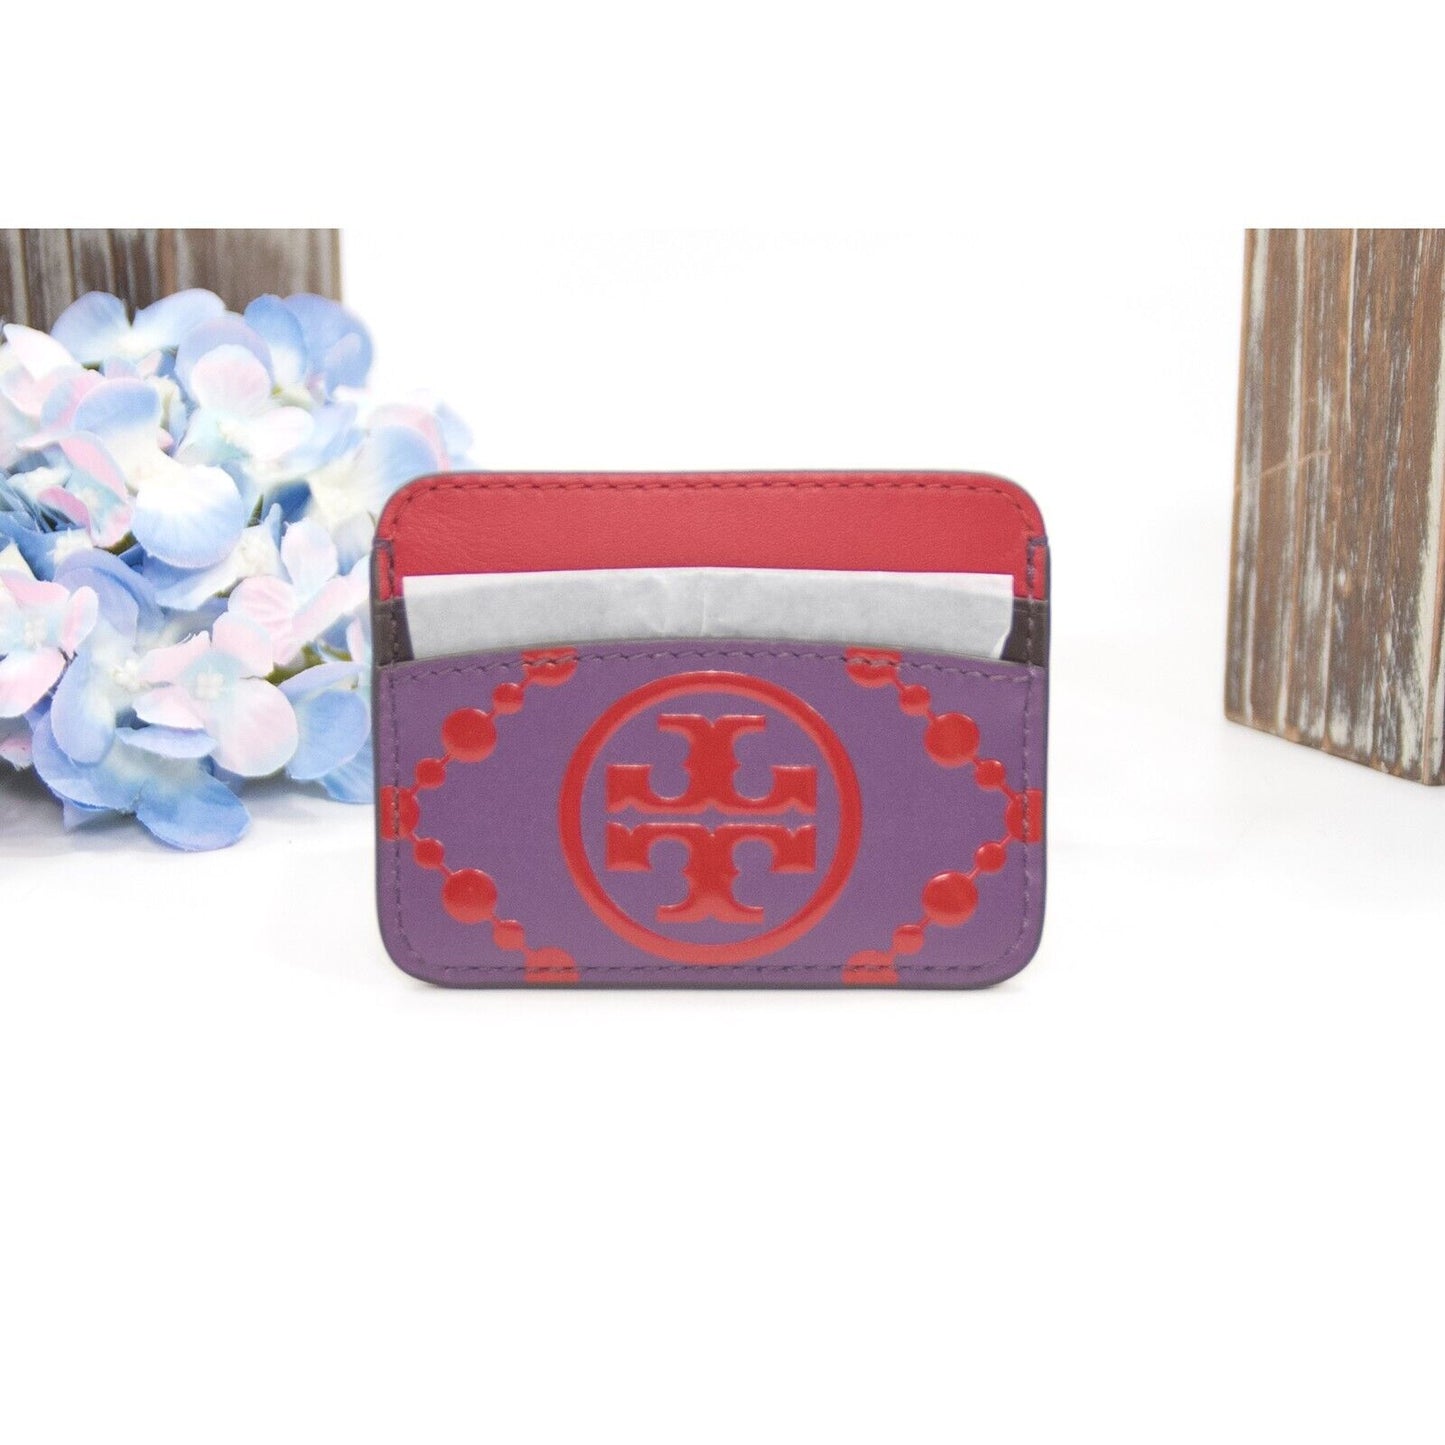 Tory Burch Wild Thistle Red Leather Colorblock Logo Card Case Mini Wallet NWT